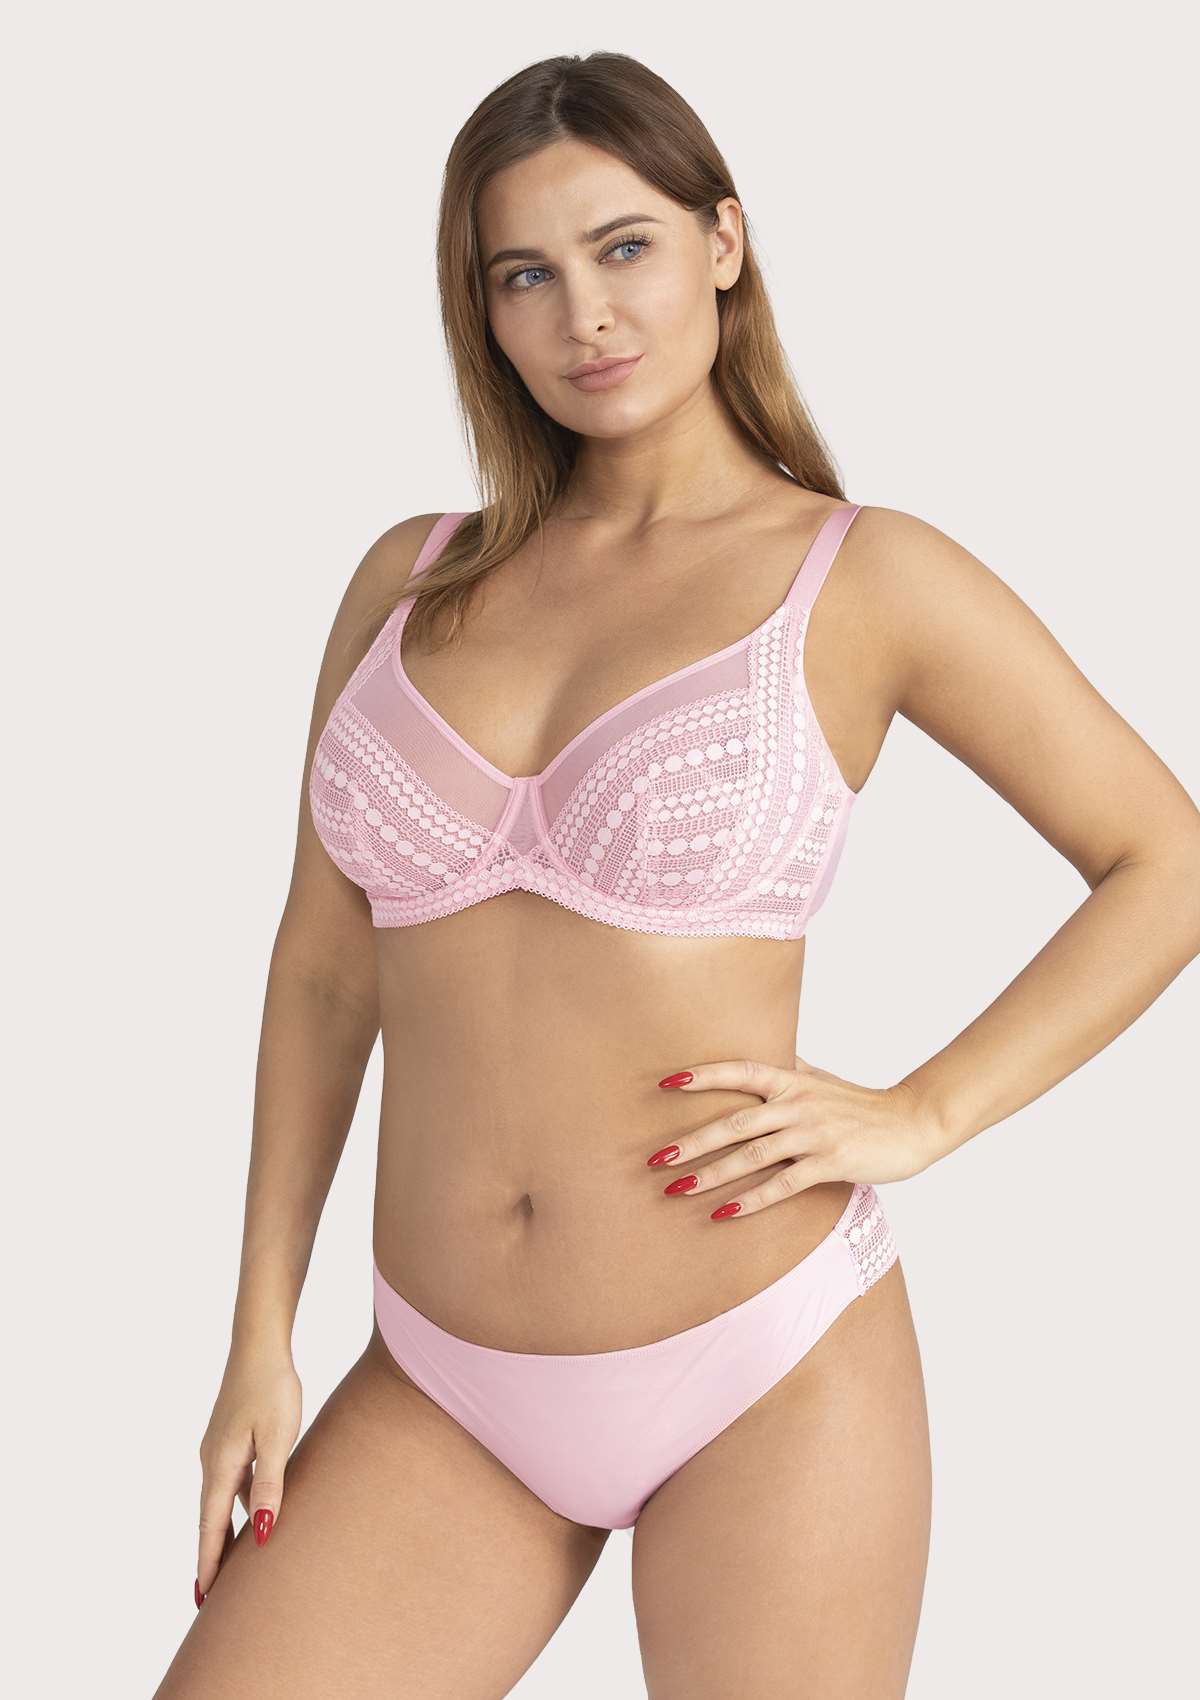 HSIA Heroine Lace Bra And Panties Set: Most Comfortable Supportive Bra - Pink / 38 / C